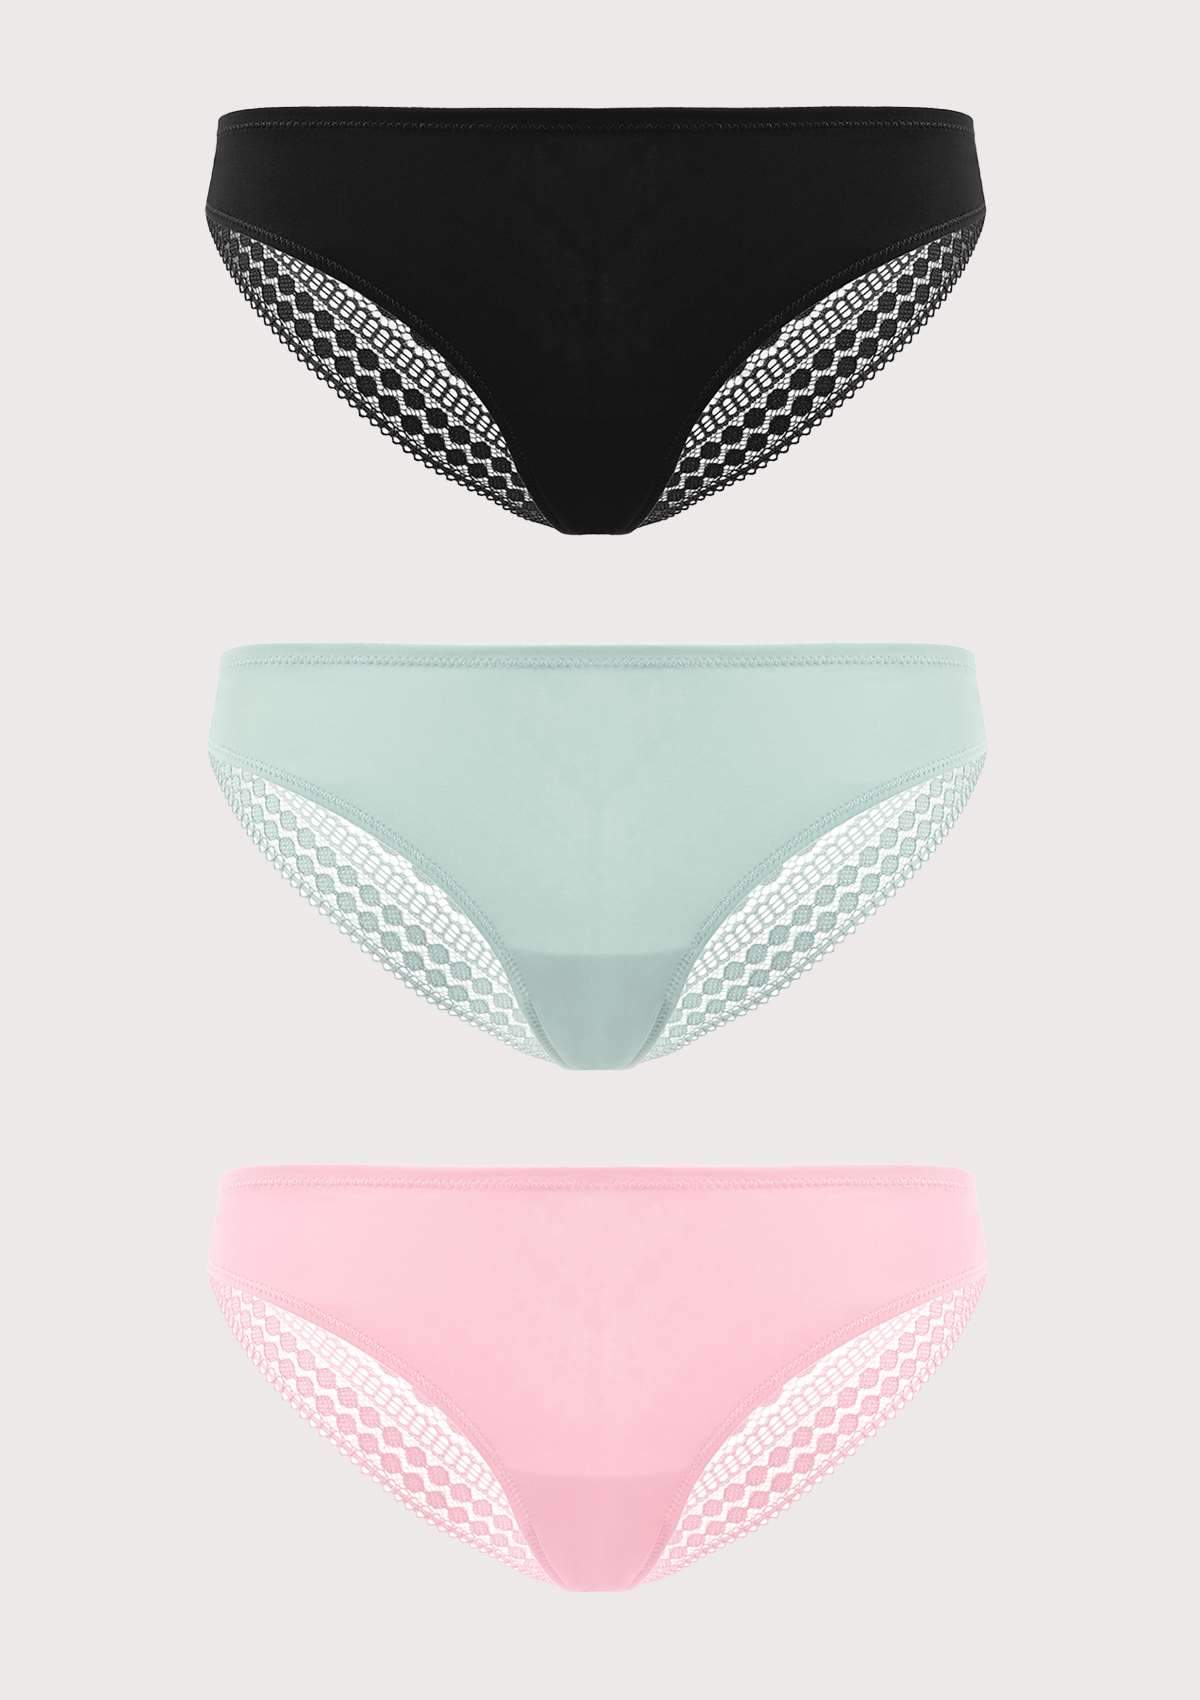 HSIA Polka Dot Super Soft Lace Back Cheeky Panties 3 Pack - S / Black+Rose Cloud+Brittany Blue